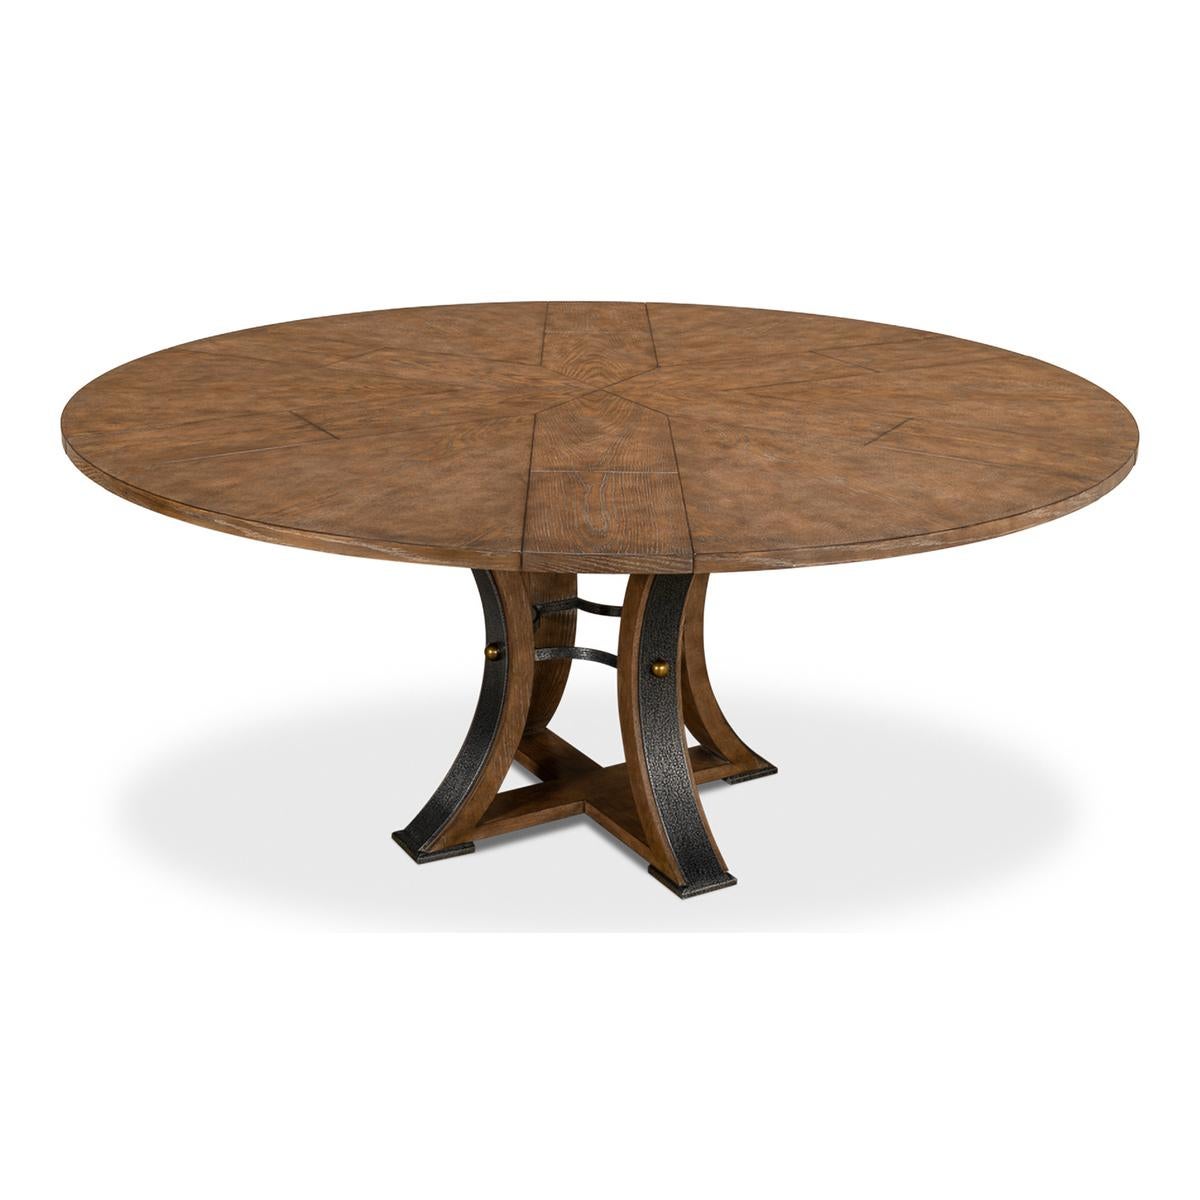 Modern Industrial Round Dining Table - 70 - Light Mink In New Condition For Sale In Westwood, NJ